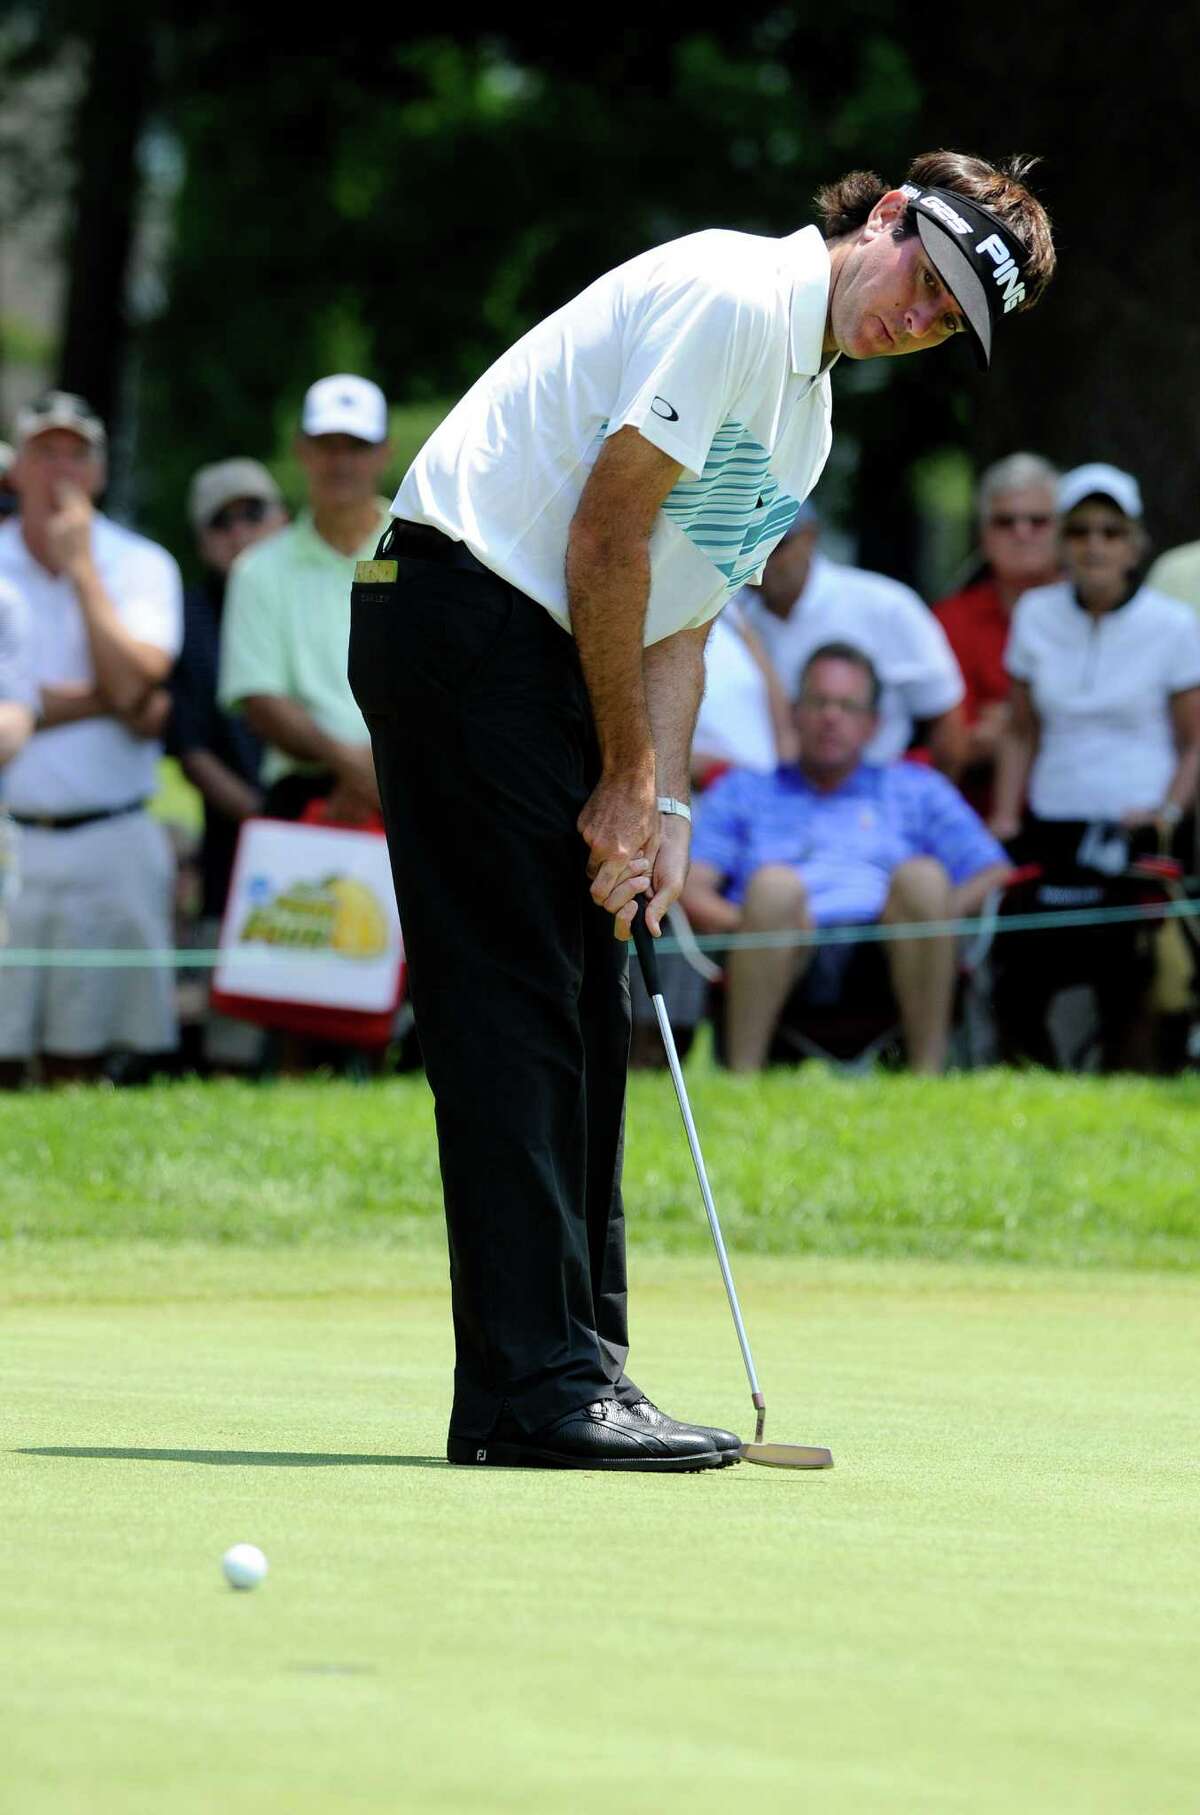 Bubba Watson watches his putt on the seventh green during the second round of the Travelers Championship golf tournament in Cromwell, Conn., Friday, June 21, 2013. Watson shot a 3-under par 67 in his round, to go 10-under par for the tournament. (AP Photo/Fred Beckham)